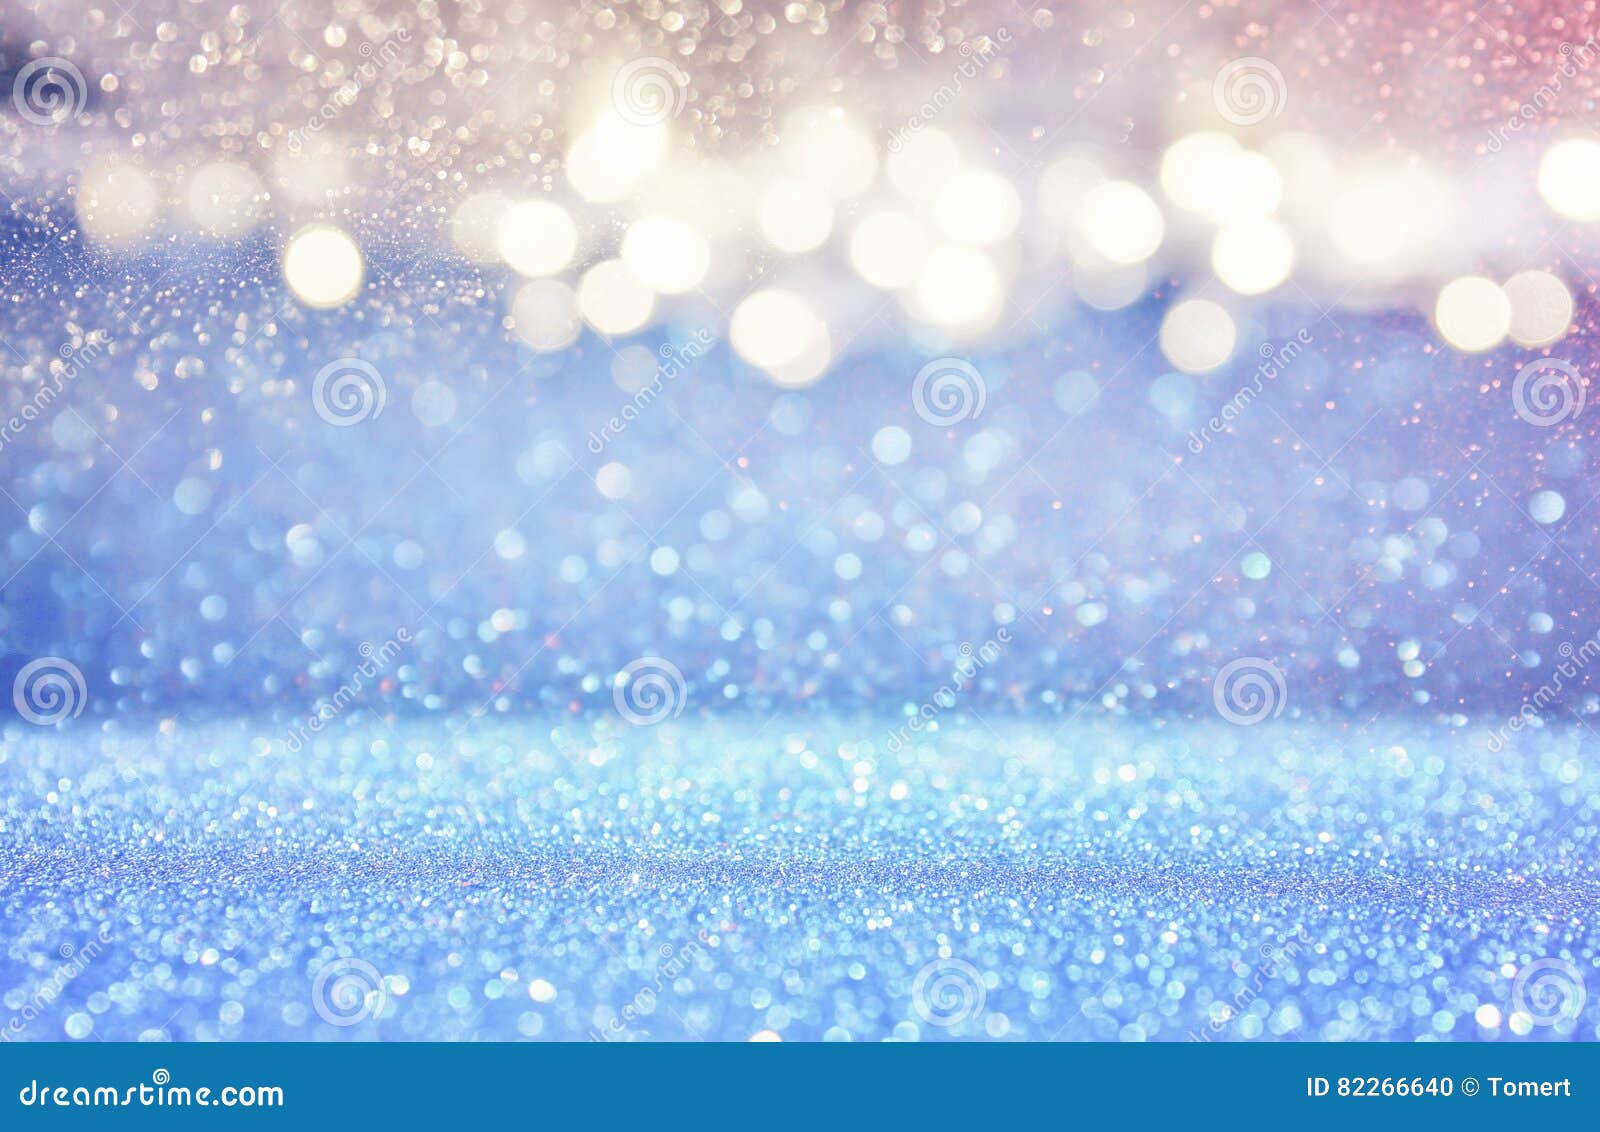 glitter light blue and silver lights background